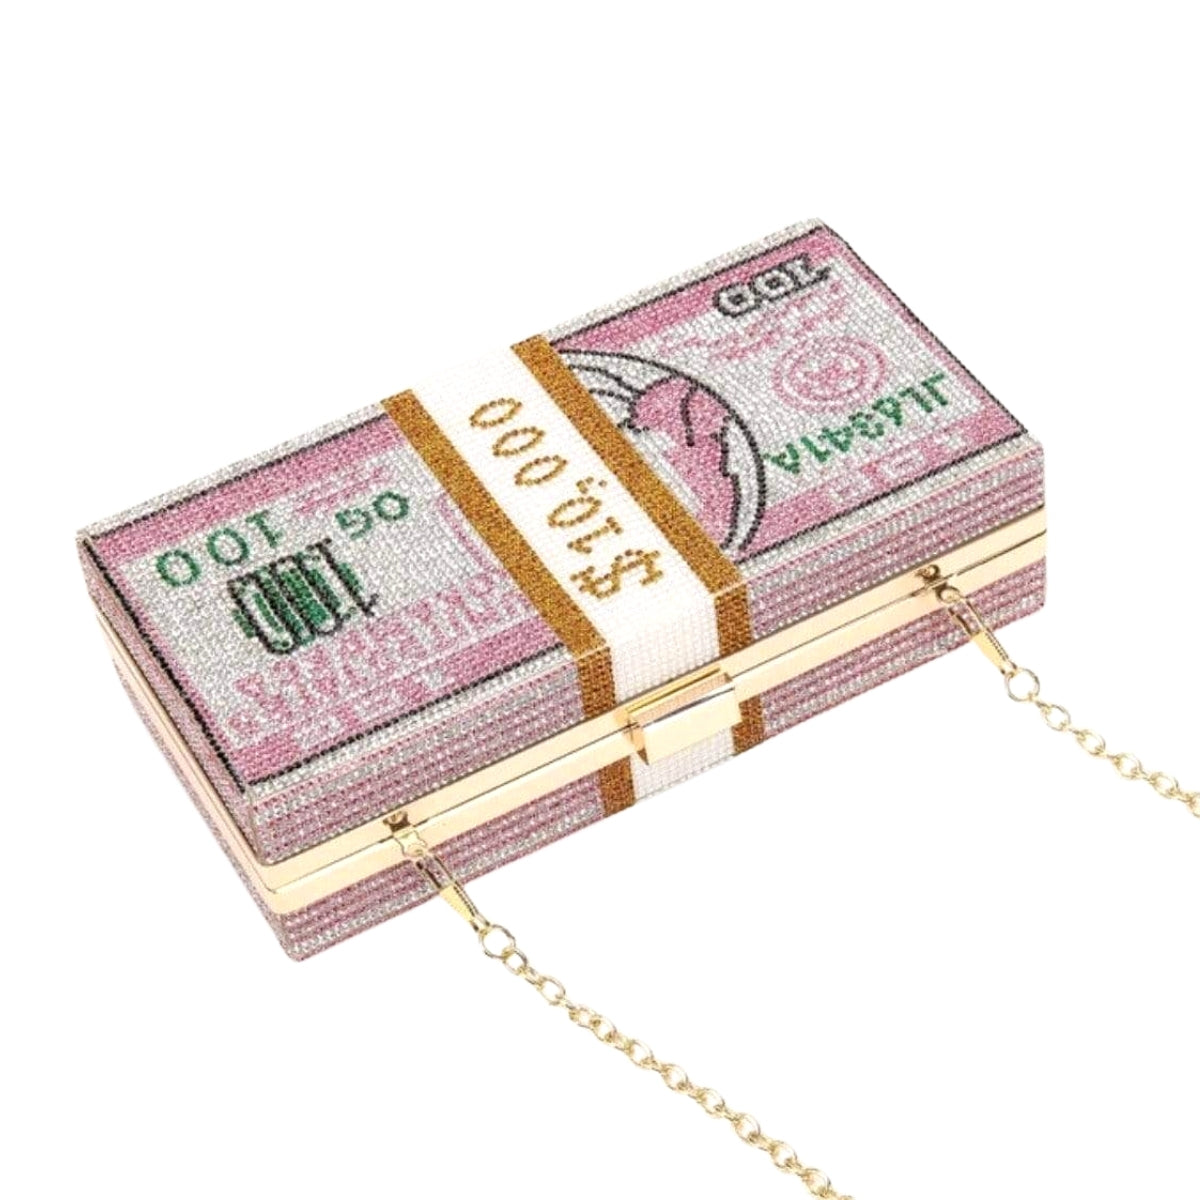 Pink Bling $10K Rectangle Clutch